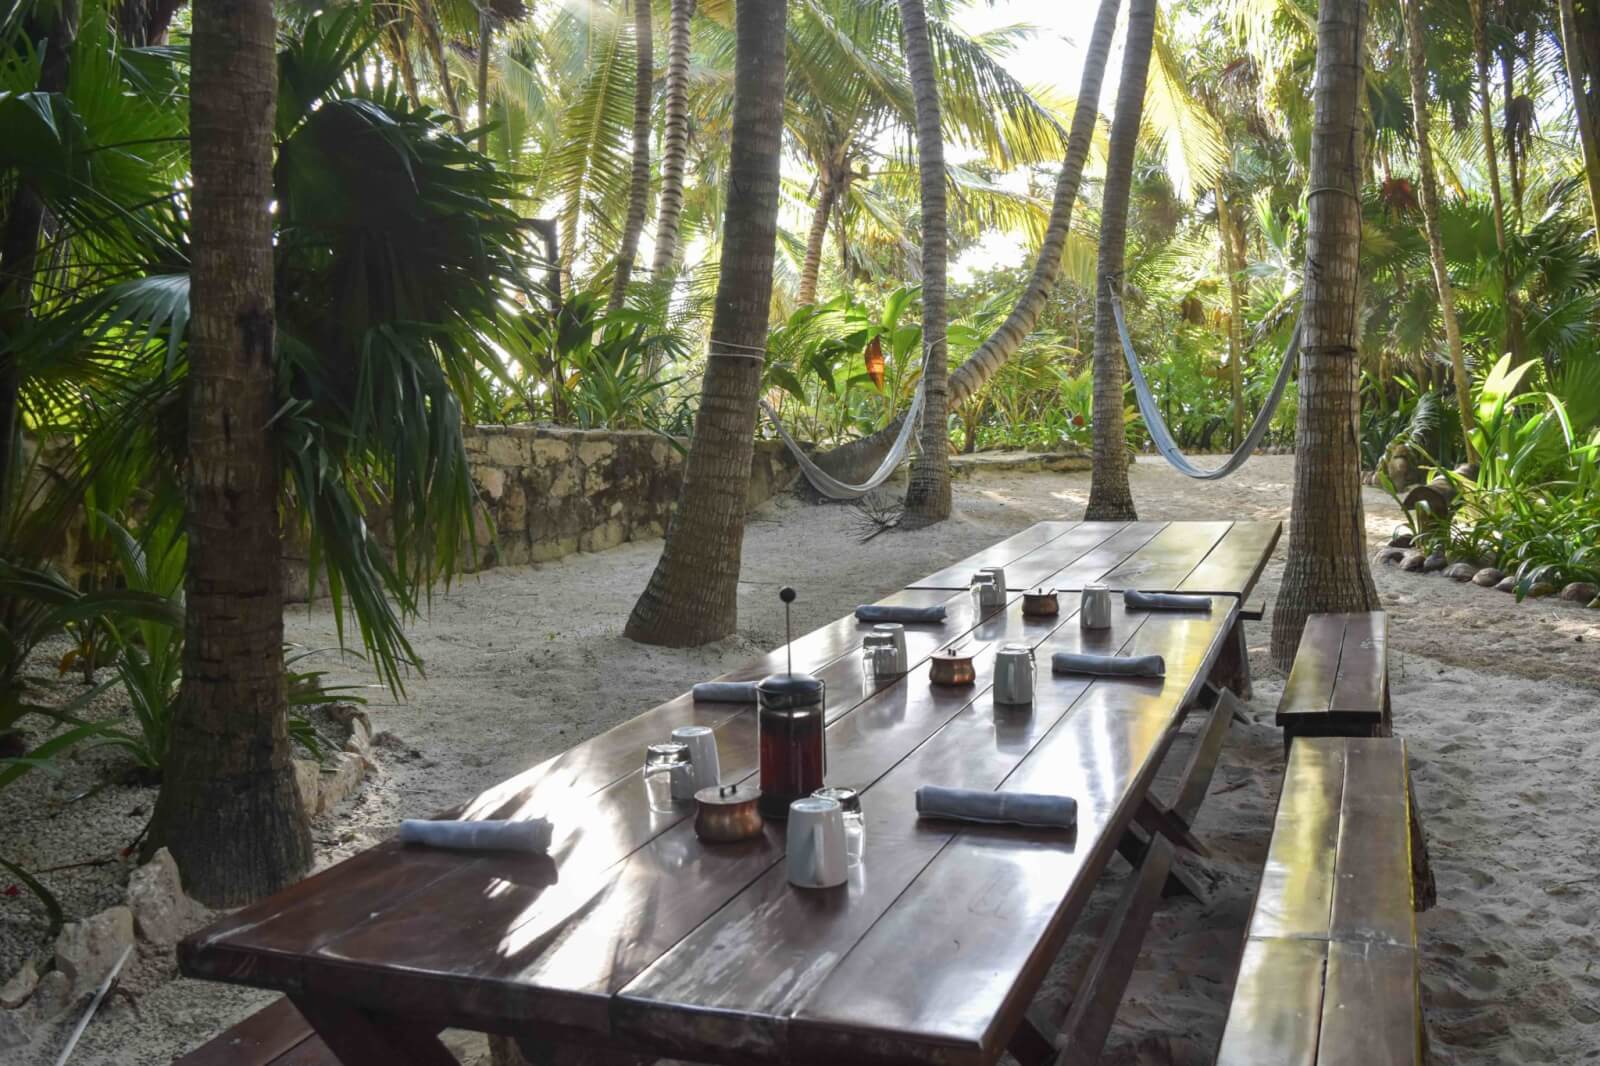 the breakfast table on the beach surrounded by trees at casa de las olas